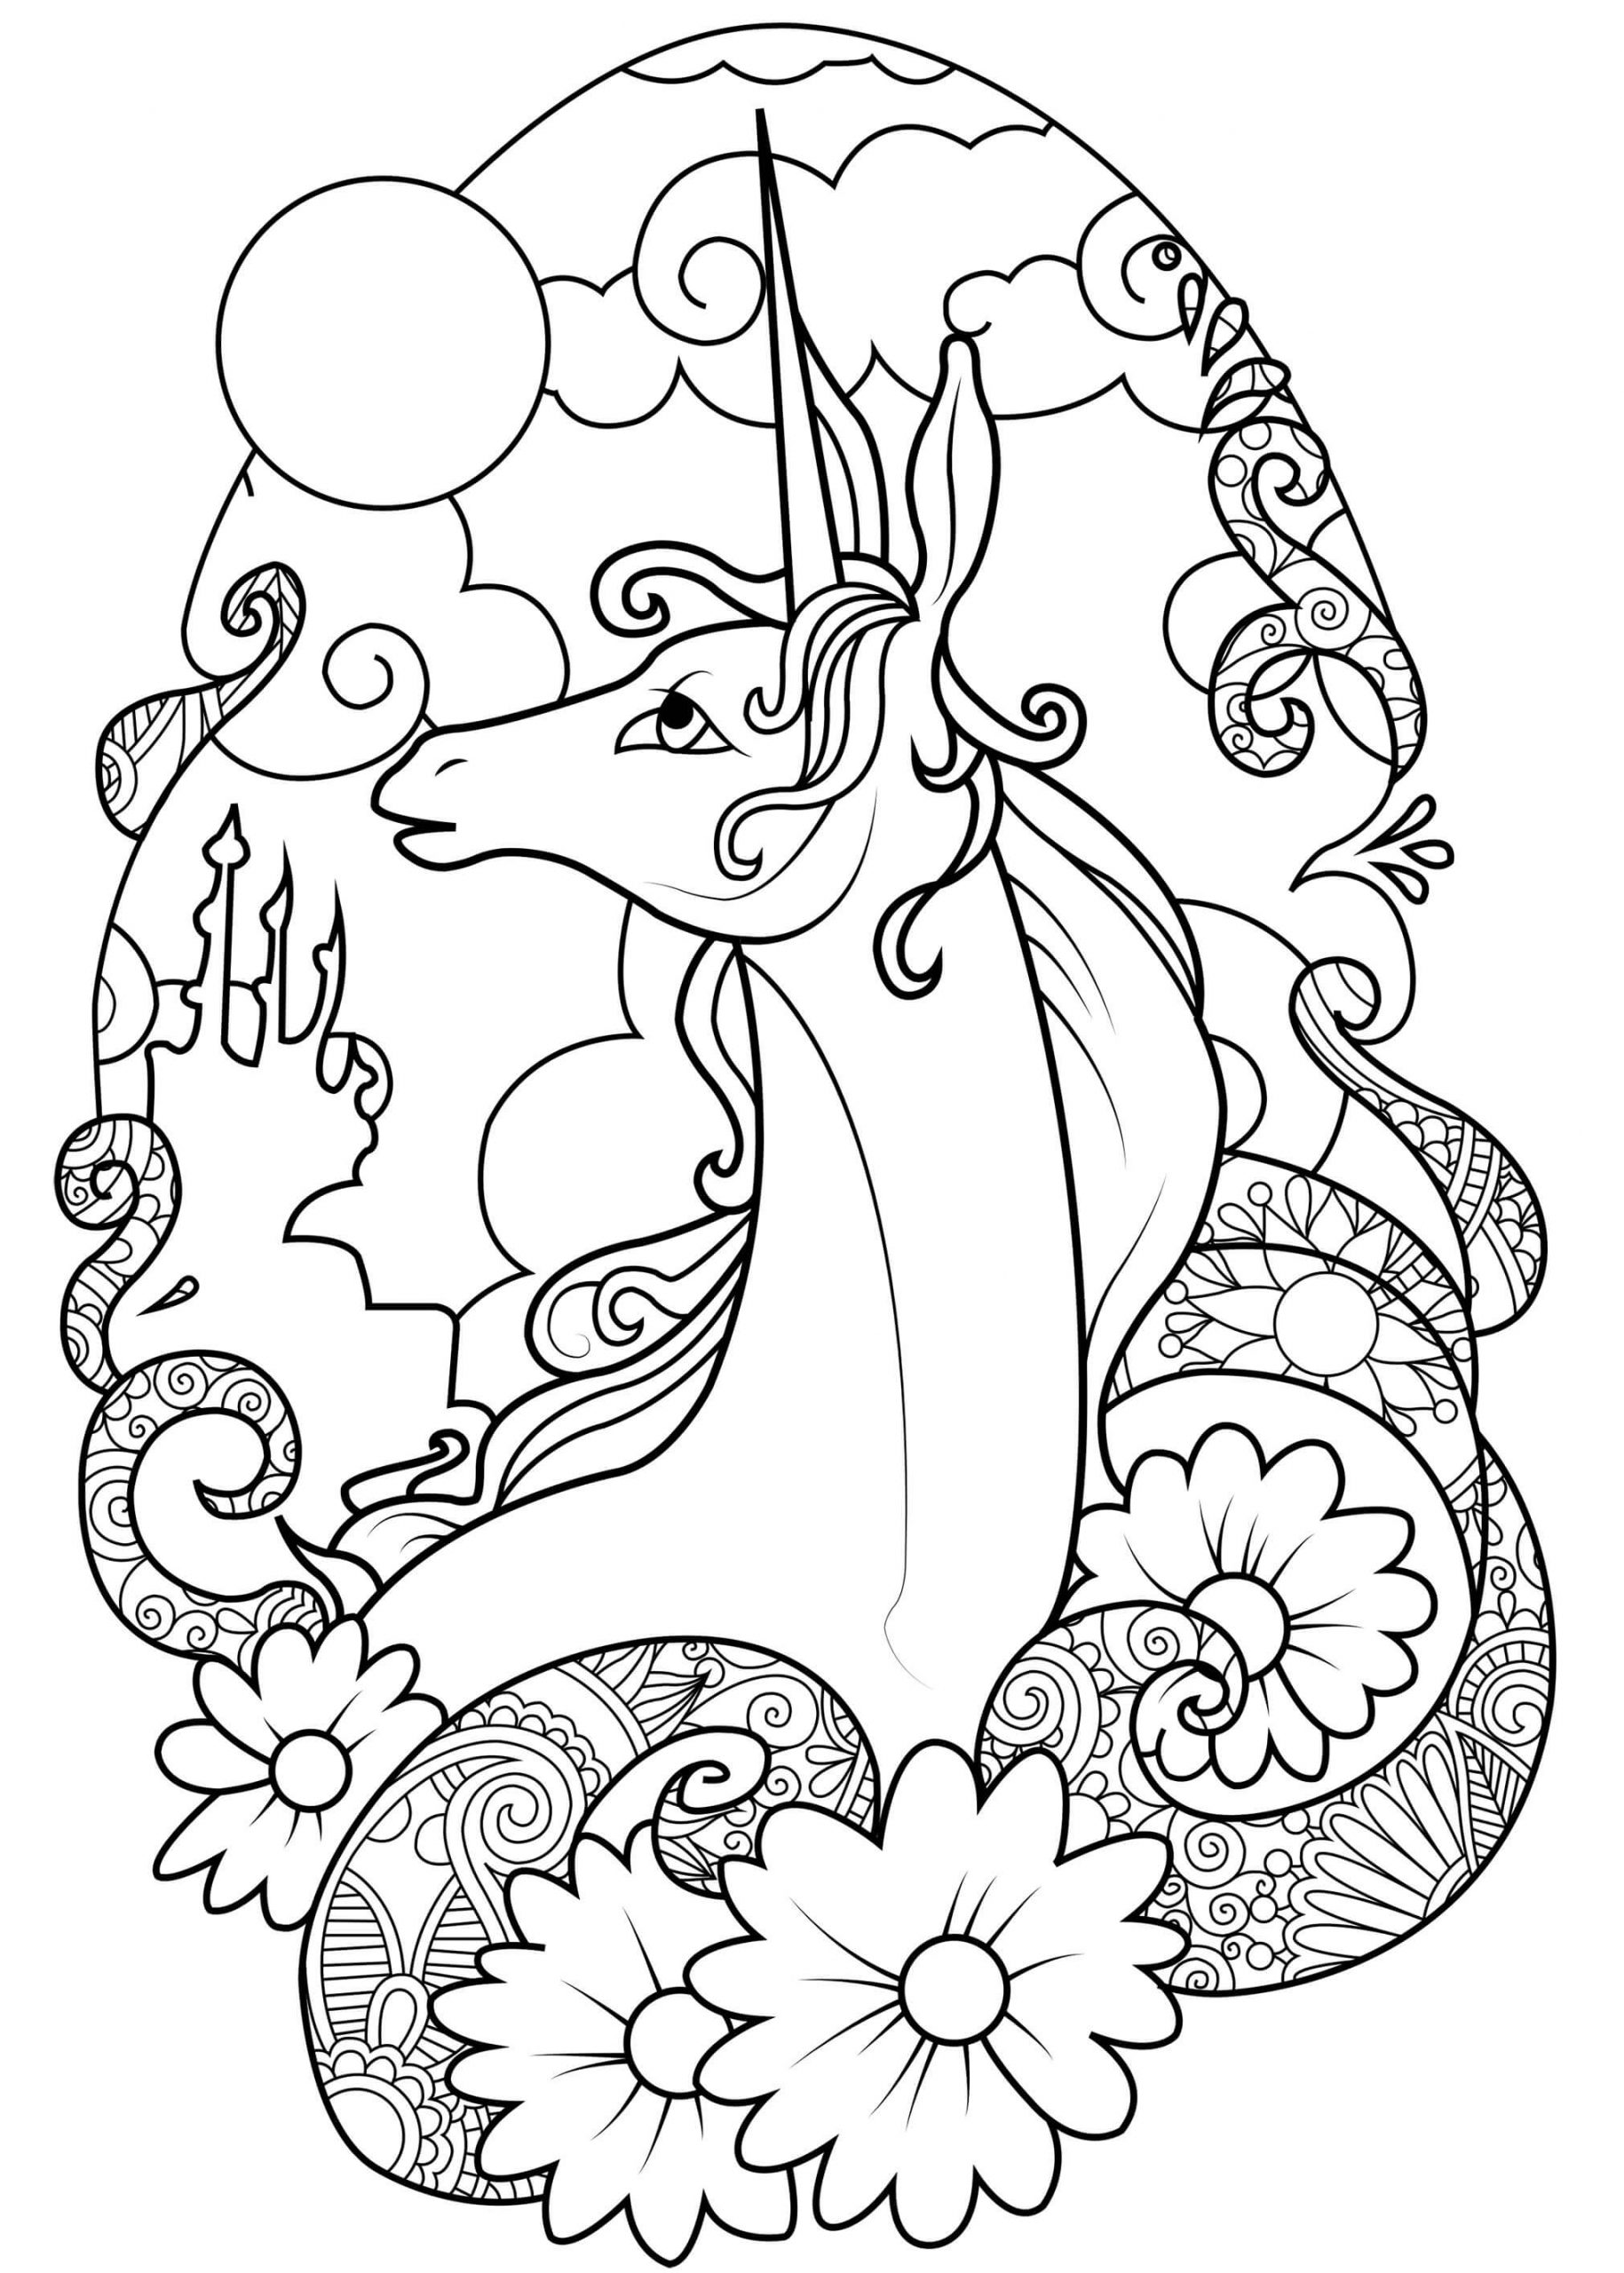 Unicorn face with flowers coloring page